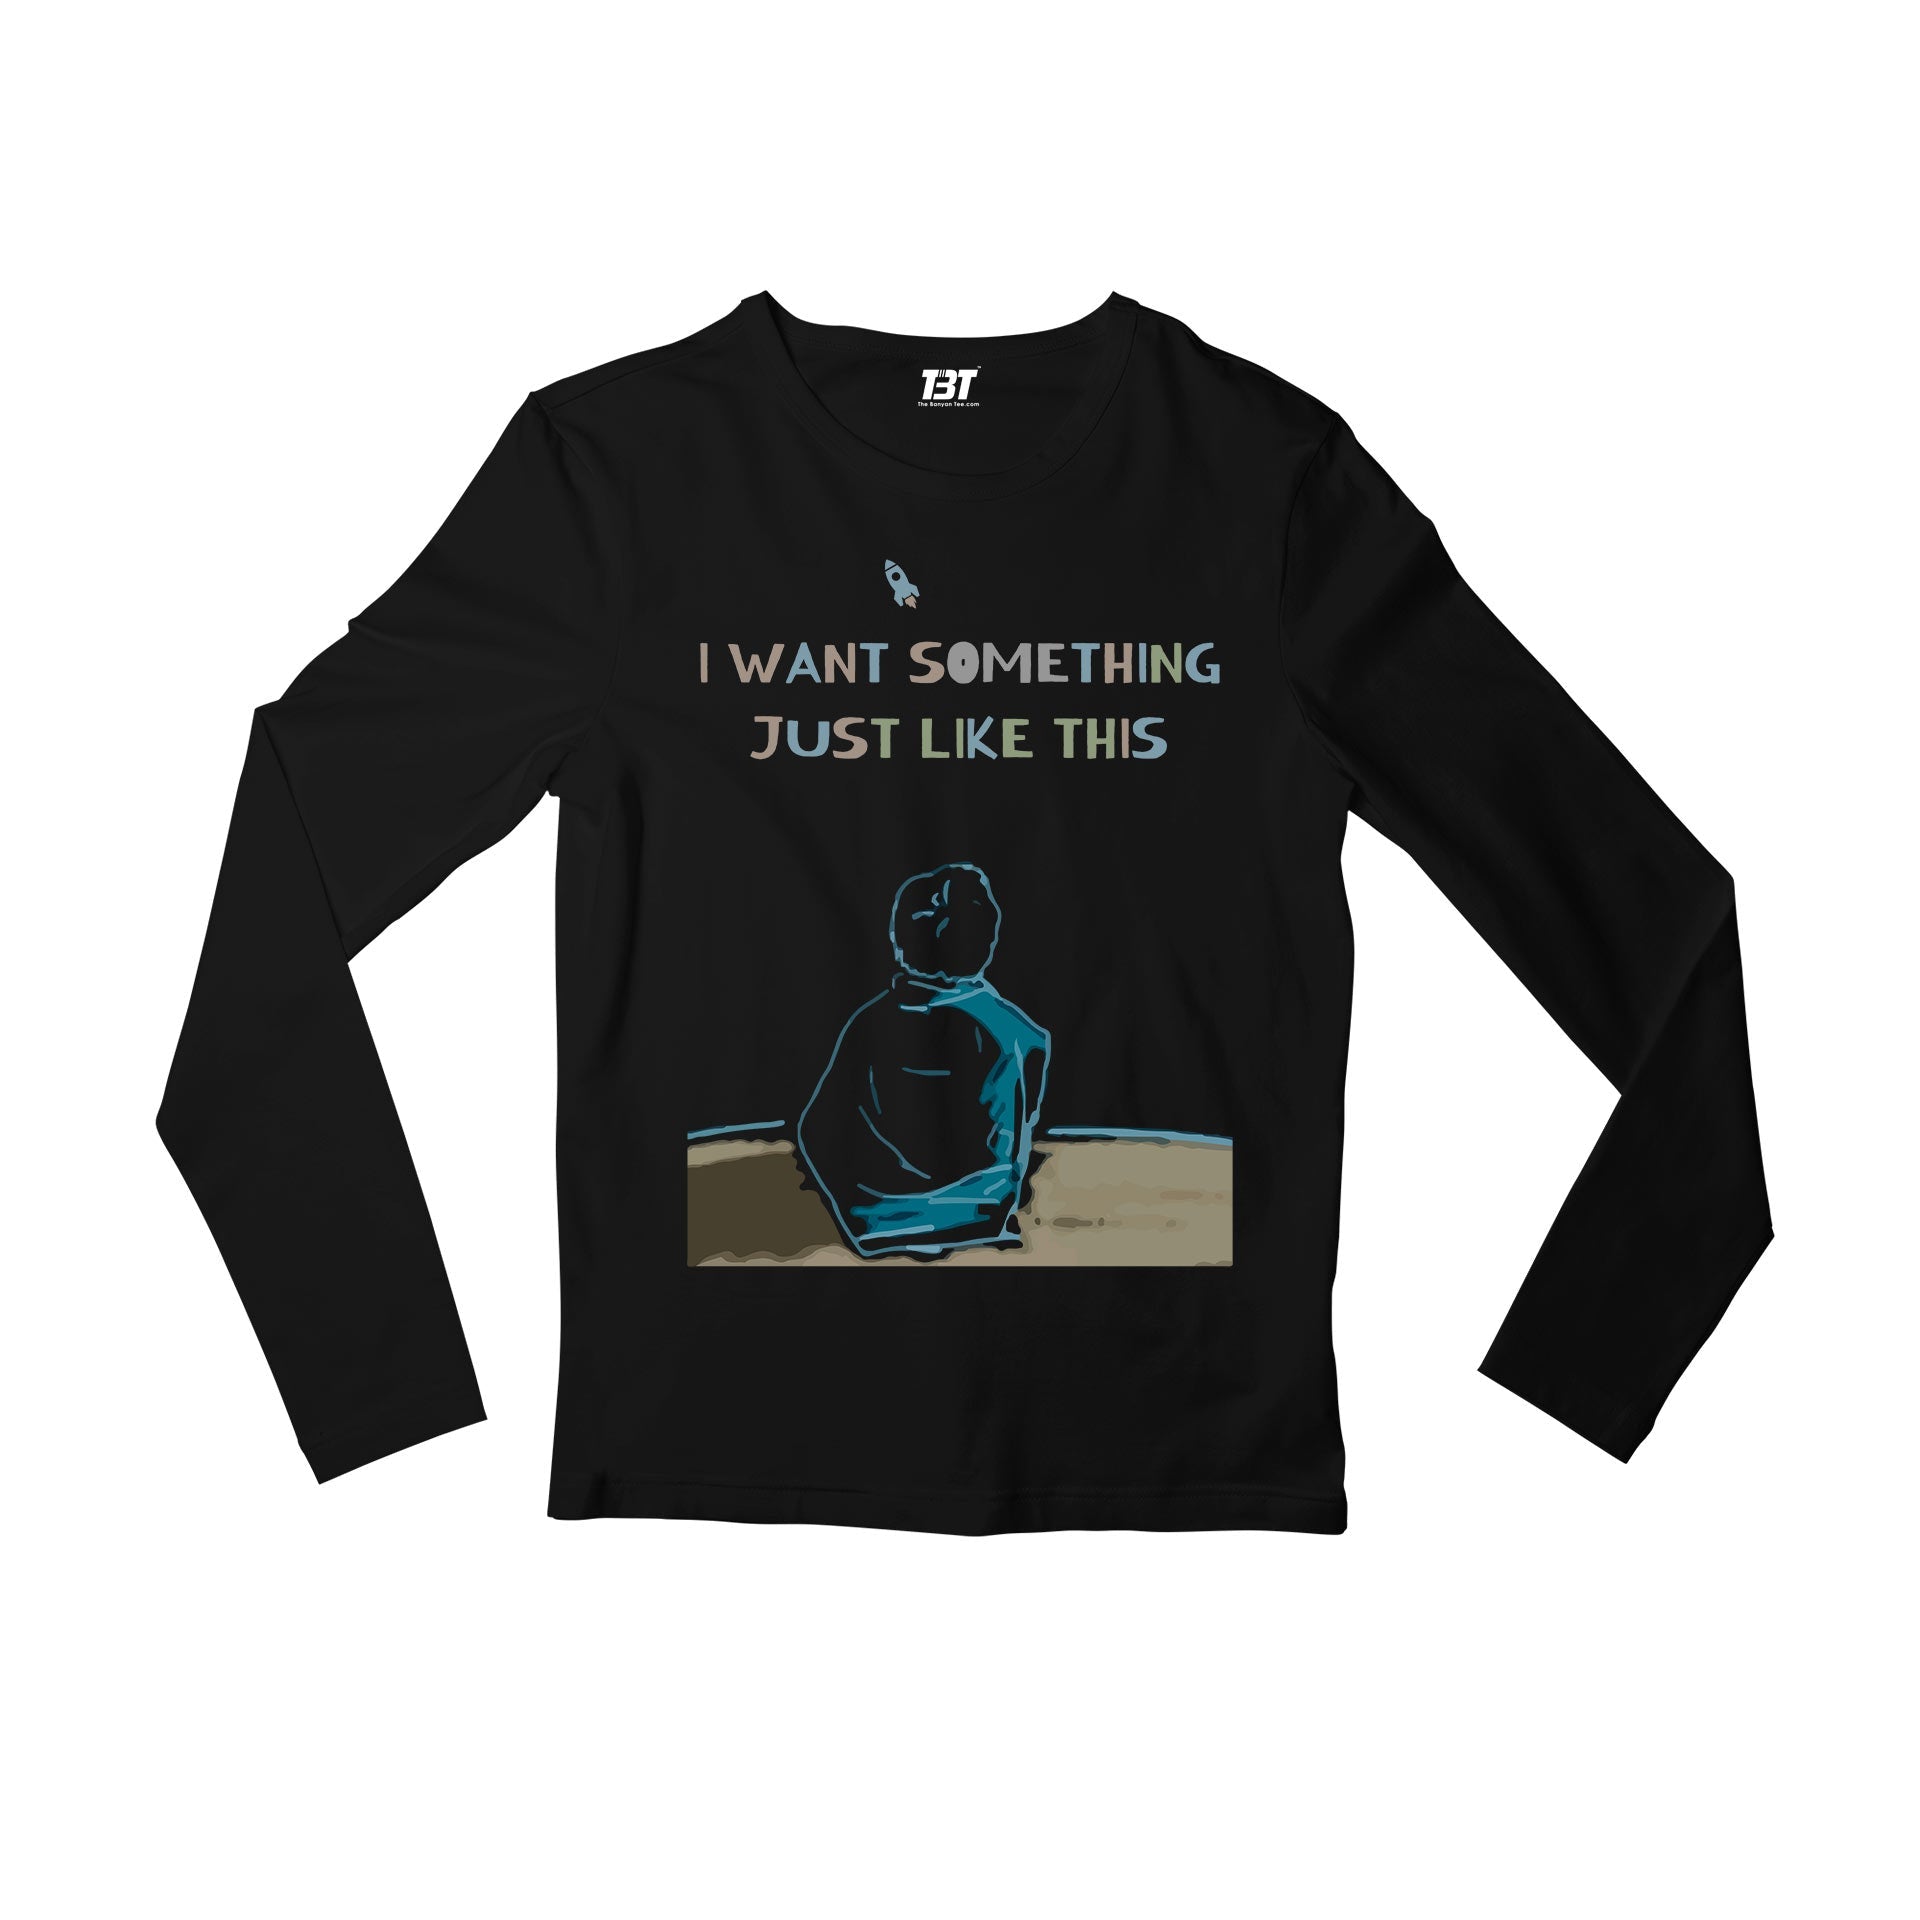 coldplay i want something just like this full sleeves long sleeves music band buy online india the banyan tee tbt men women girls boys unisex black